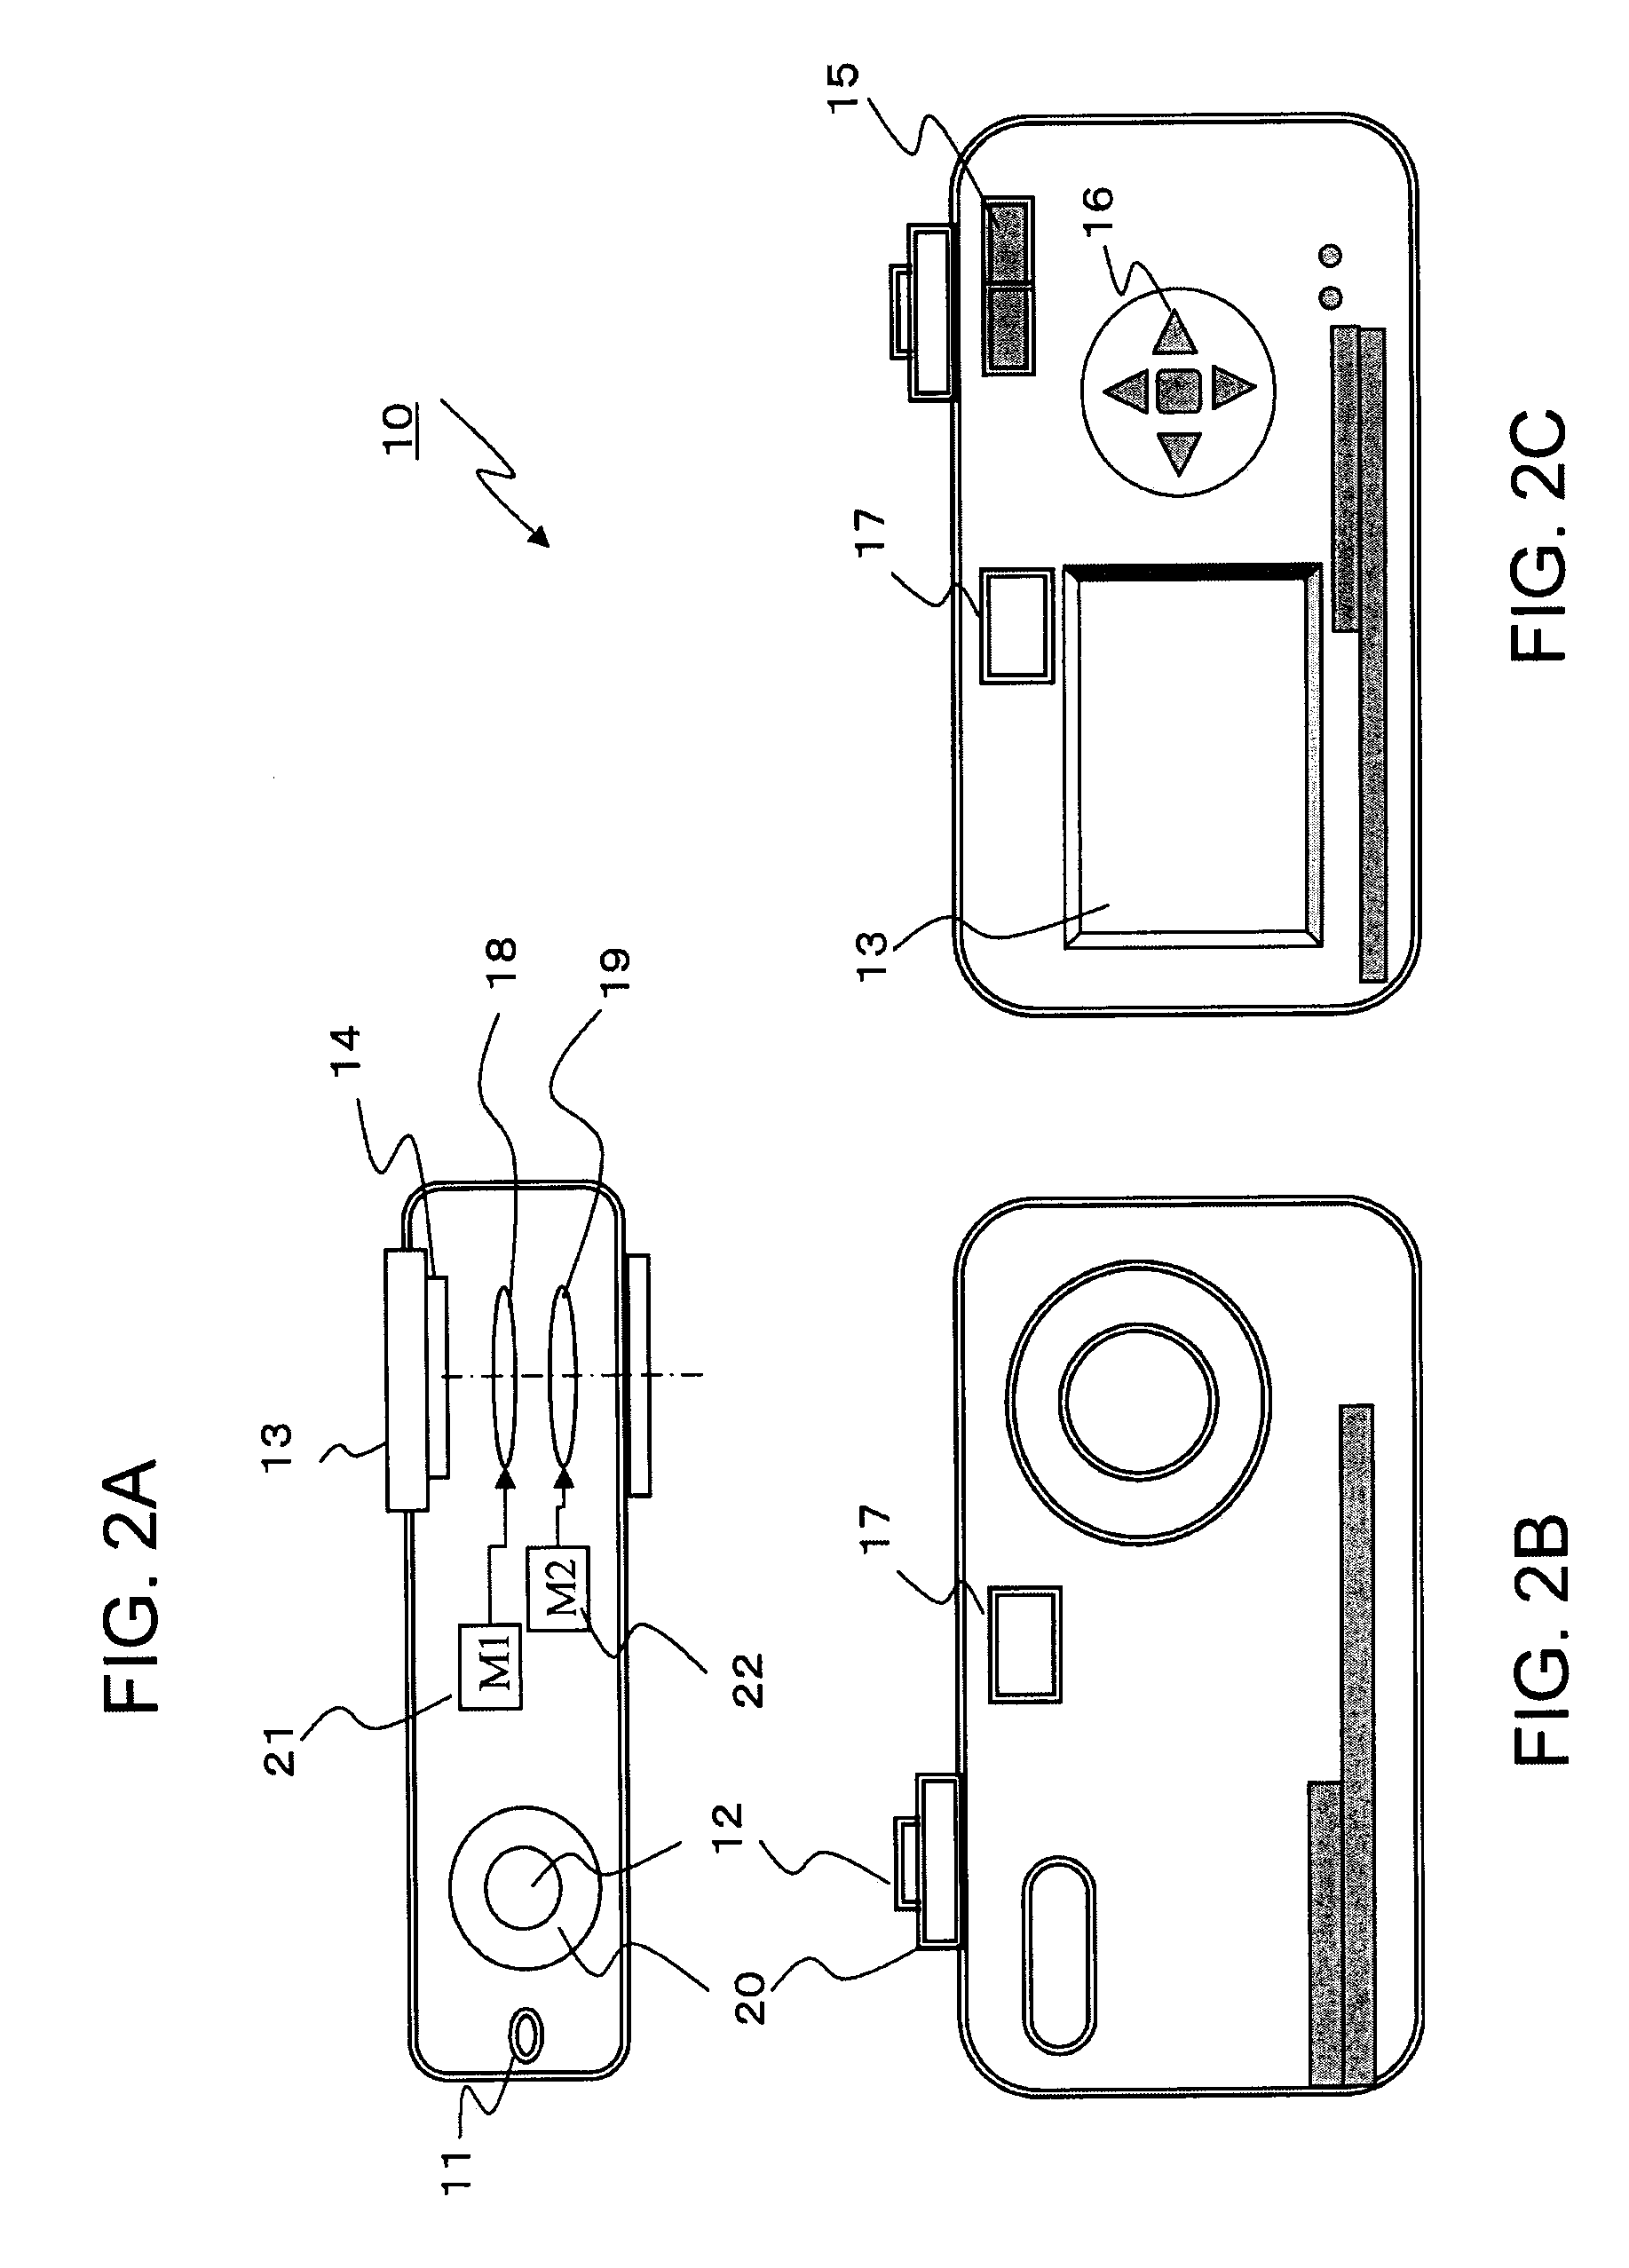 Image pickup apparatus, control method therefor, and computer program